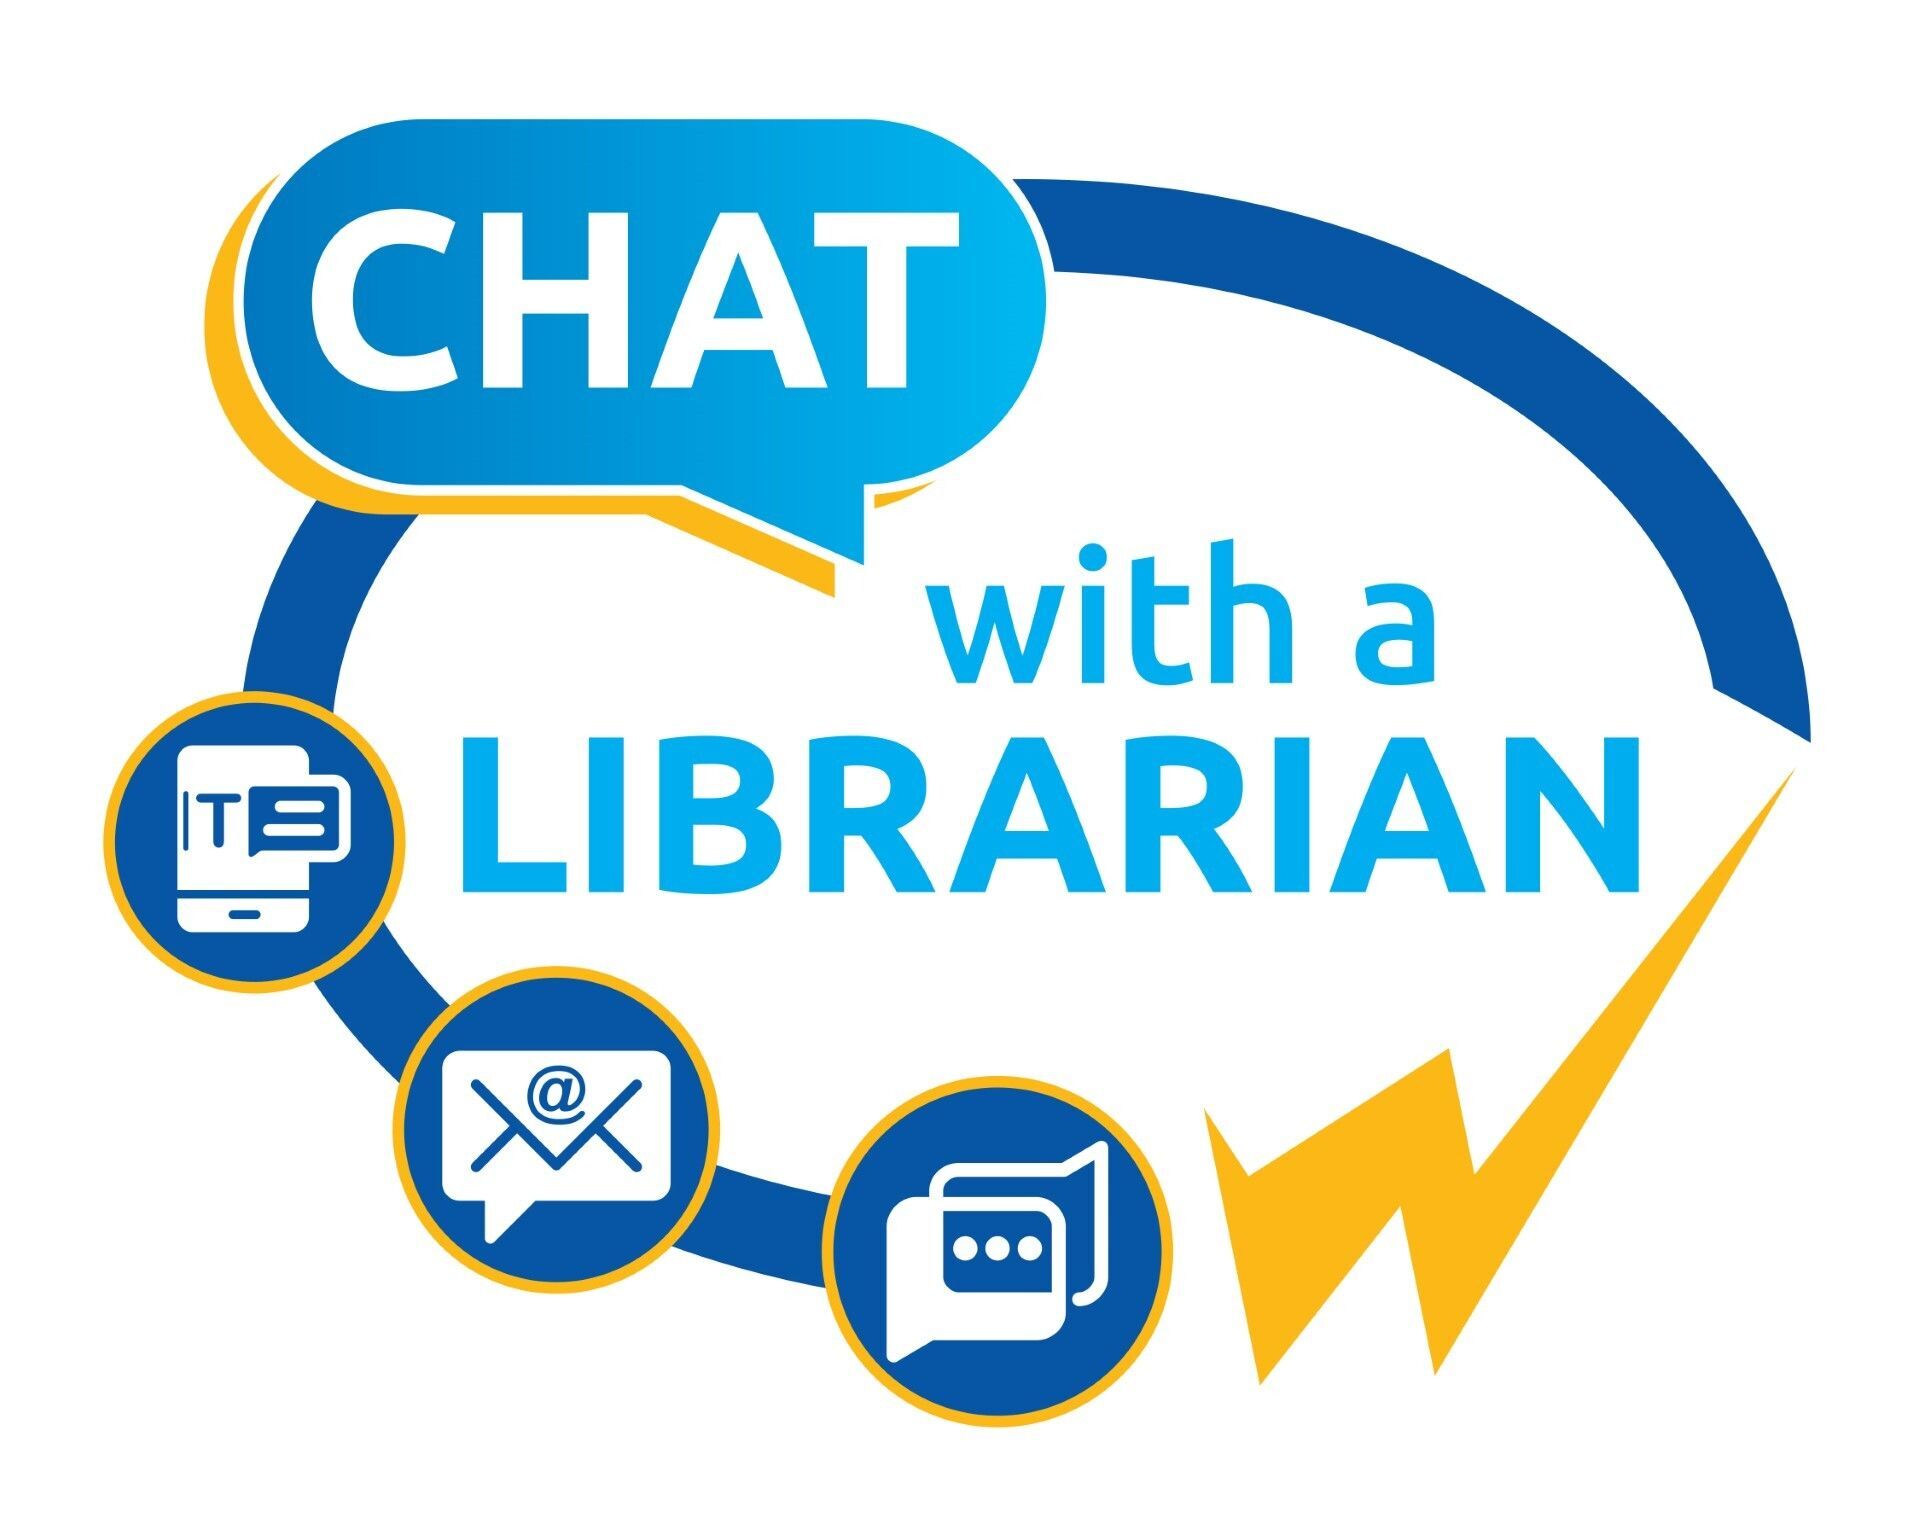 Chat with a Librarian